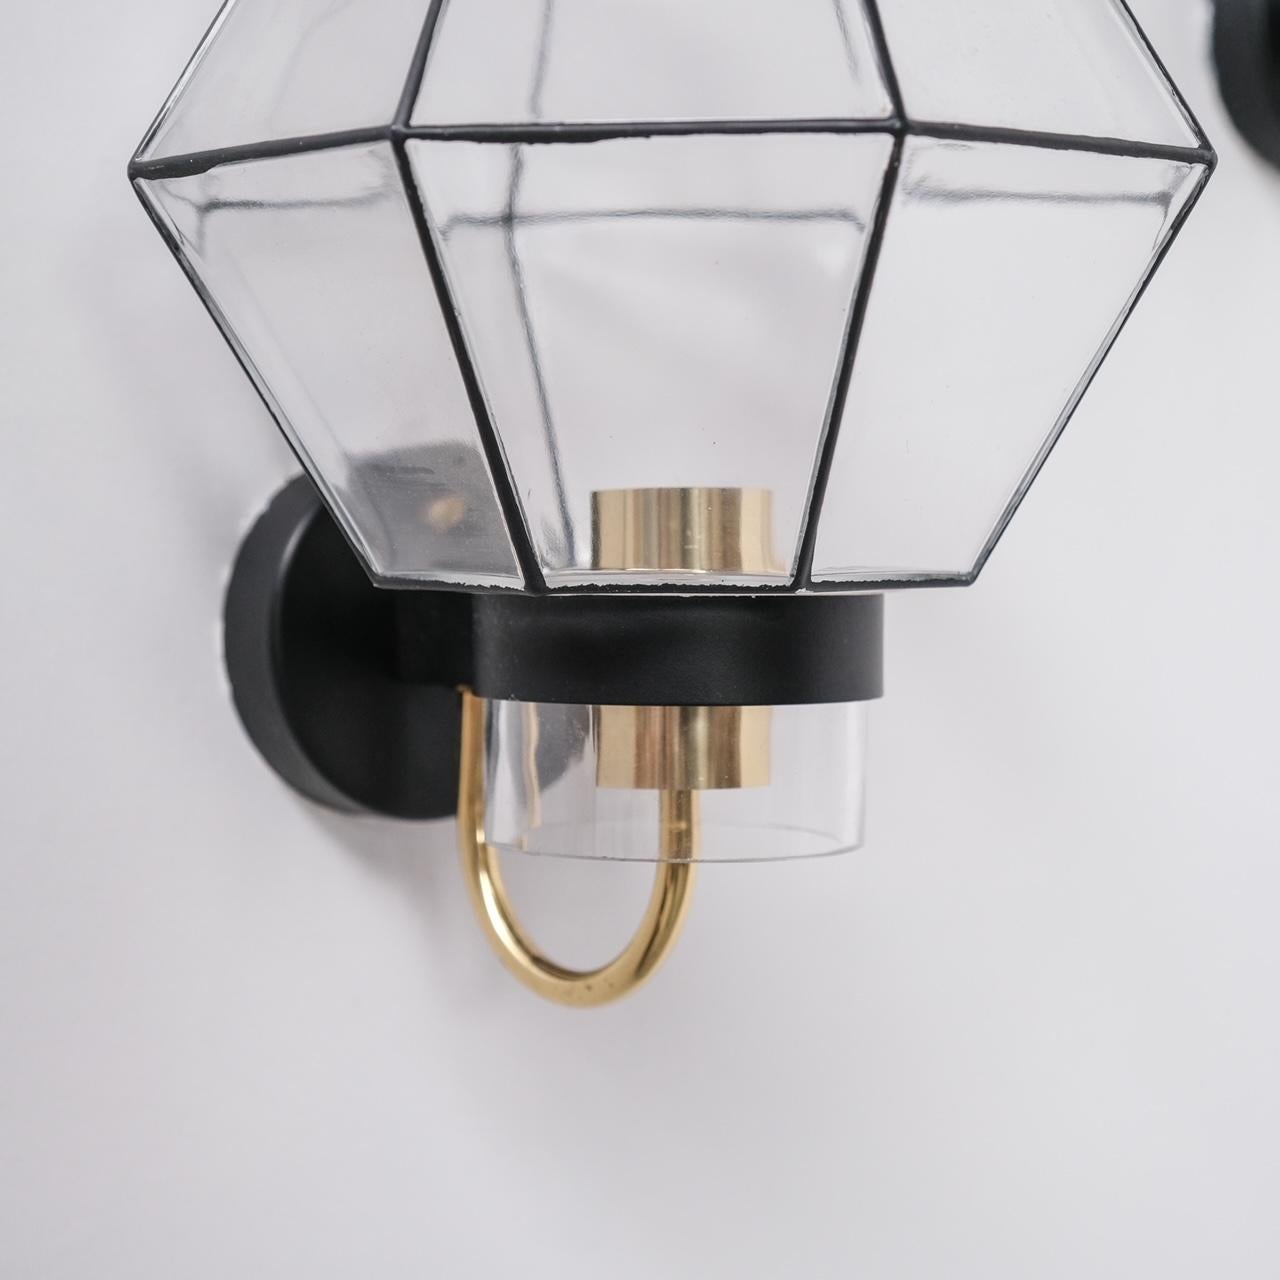 A pair of glass and brass wall lights.

German, circa 1970s.

Produced for Limburg.

Since re-wired and PAT tested.

Location: Belgium Gallery.

Dimensions: 25.5 H x 25 W x 30 D in cm.

Delivery: POA

We can ship around the world. Can